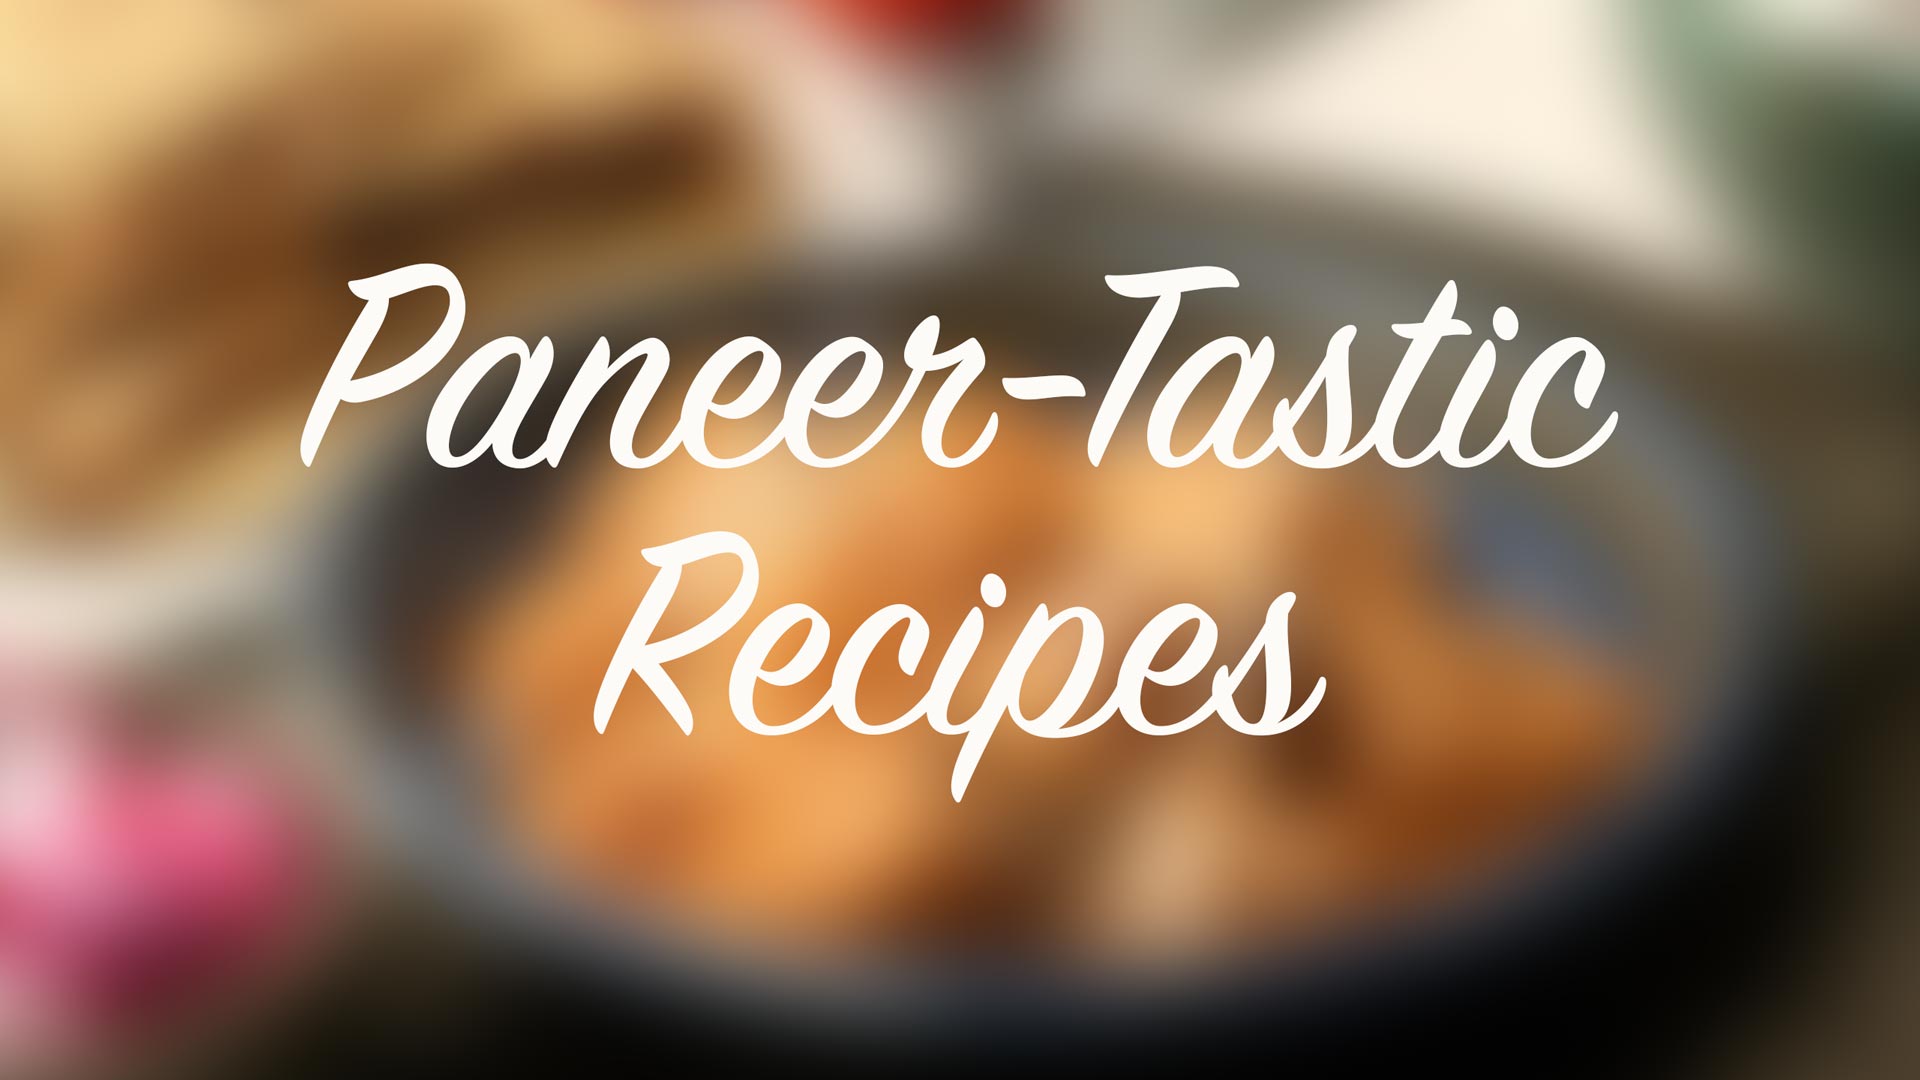 Paneer recipes | Top 12 Indian Paneer Recipes | Collection of Delicious Paneer Recipes